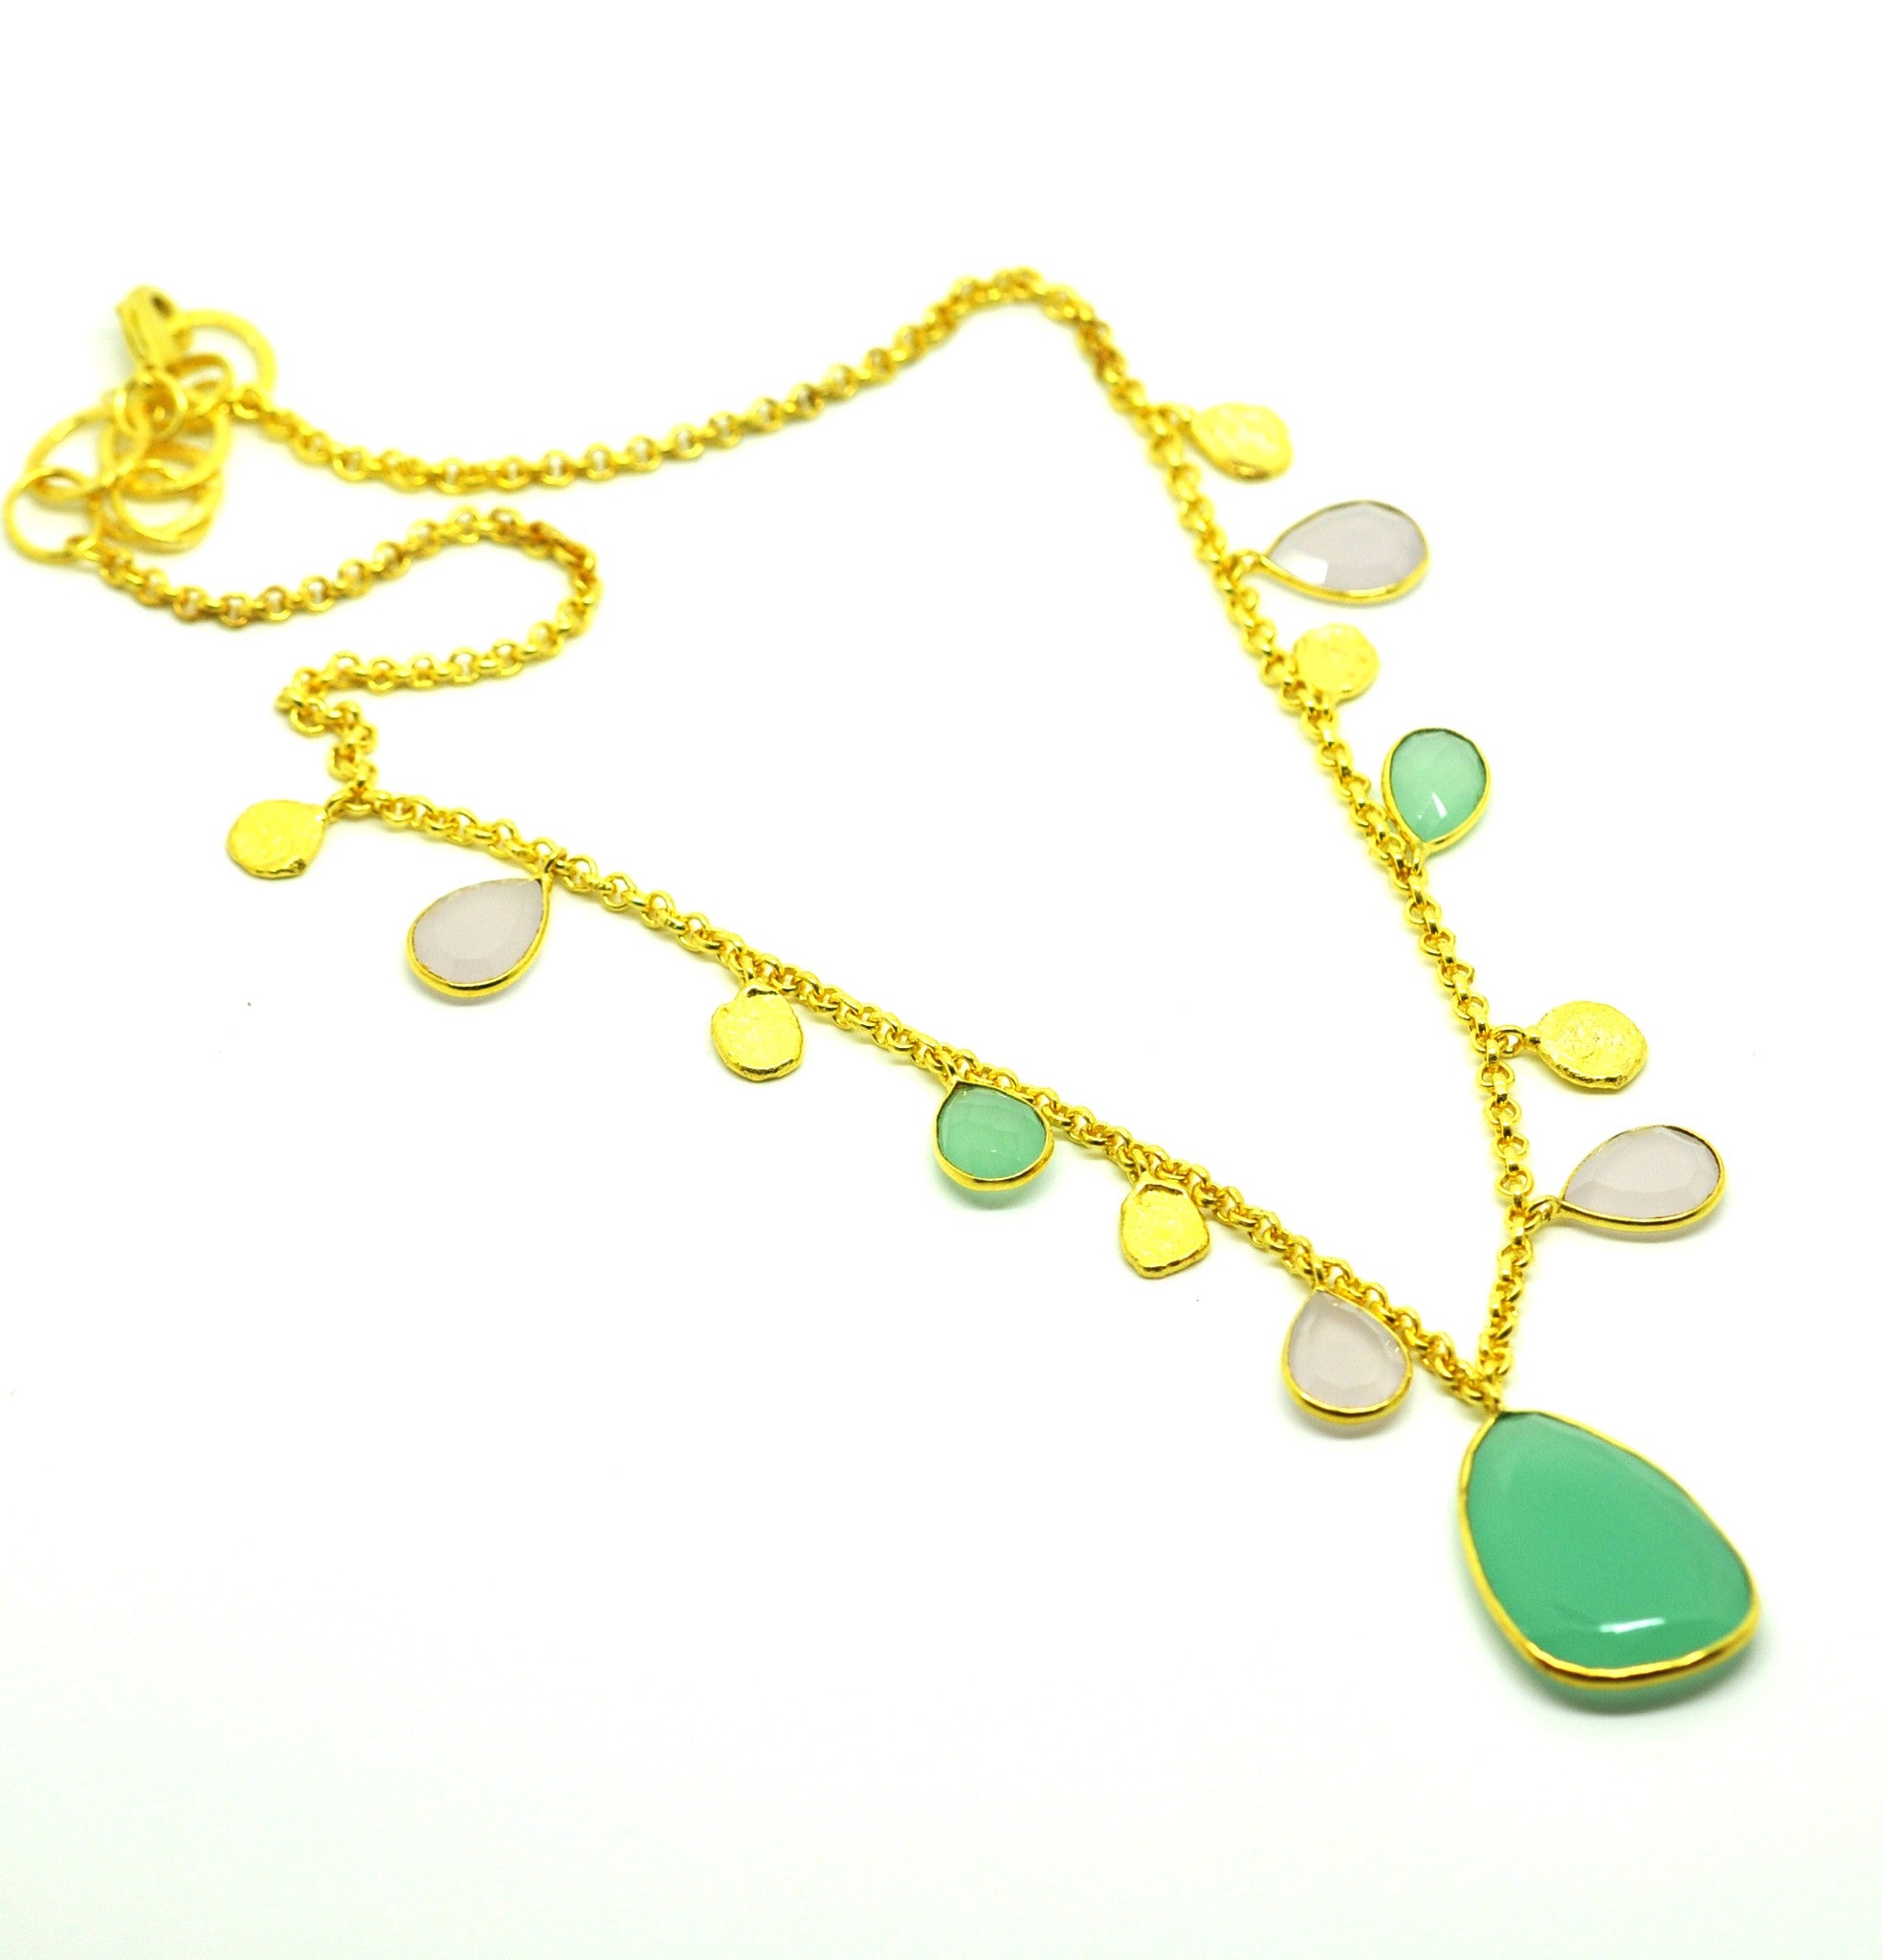 SOLD - ON SALE Chalcedony necklace (CLEARANCE)